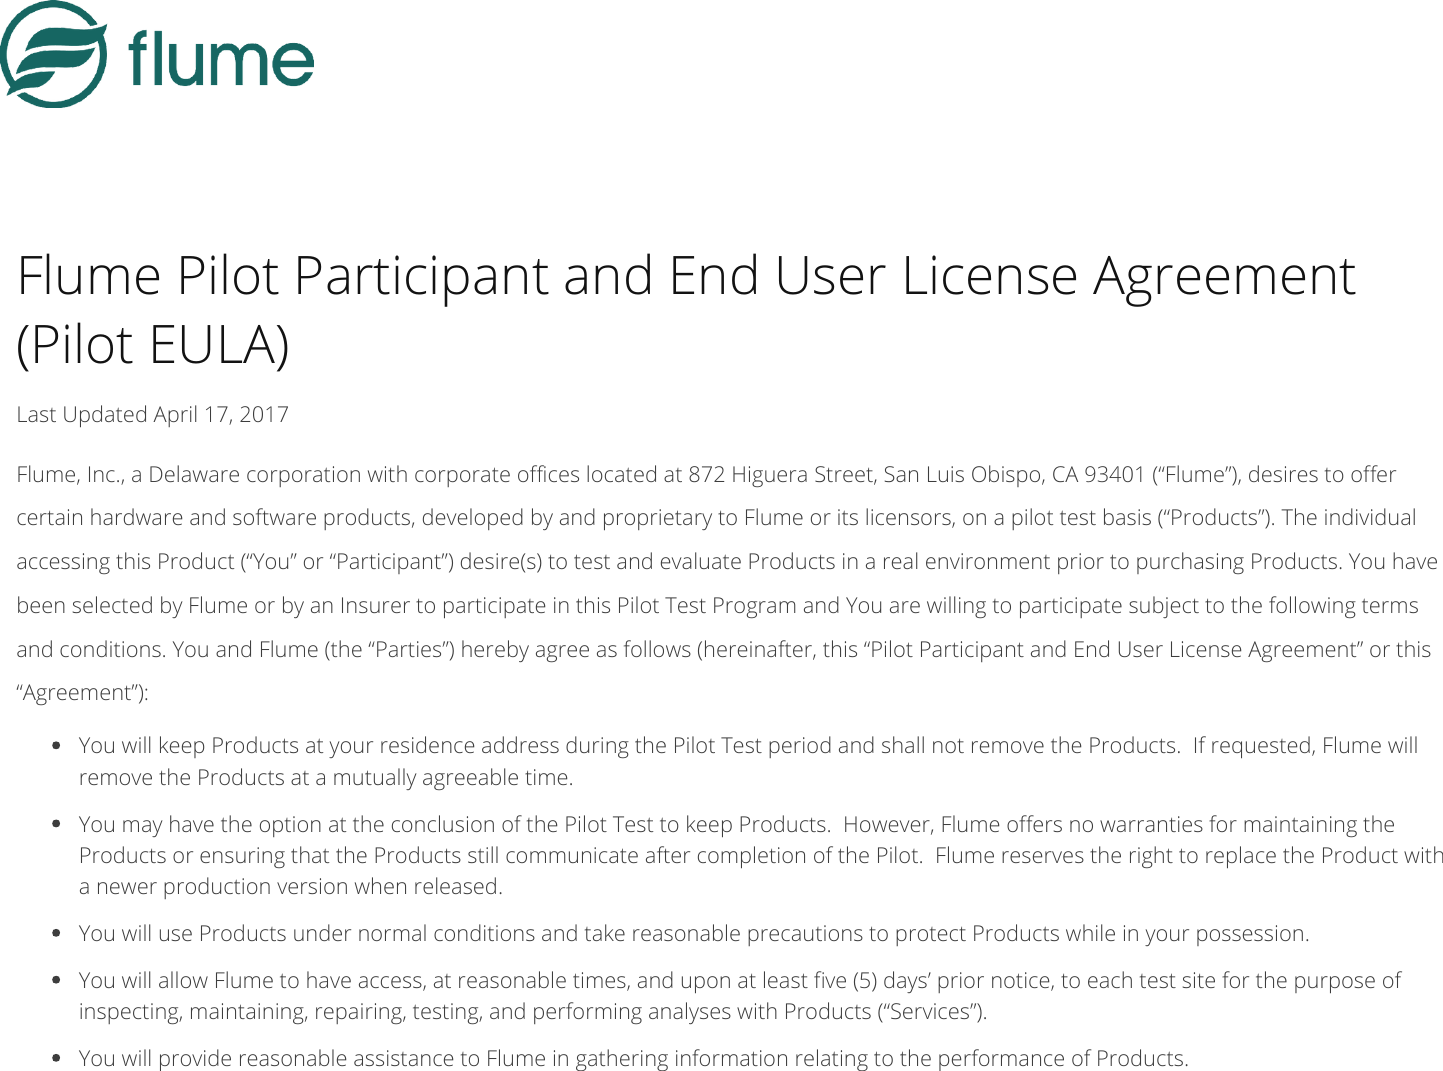 Flume Pilot Participant and End User License Agreement(Pilot EULA)Last Updated April 17, 2017Flume, Inc., a Delaware corporation with corporate oces located at 872 Higuera Street, San Luis Obispo, CA 93401 (“Flume”), desires to oercertain hardware and software products, developed by and proprietary to Flume or its licensors, on a pilot test basis (“Products”). The individualaccessing this Product (“You” or “Participant”) desire(s) to test and evaluate Products in a real environment prior to purchasing Products. You havebeen selected by Flume or by an Insurer to participate in this Pilot Test Program and You are willing to participate subject to the following termsand conditions. You and Flume (the “Parties”) hereby agree as follows (hereinafter, this “Pilot Participant and End User License Agreement” or this“Agreement”): You will keep Products at your residence address during the Pilot Test period and shall not remove the Products. If requested, Flume willremove the Products at a mutually agreeable time. You may have the option at the conclusion of the Pilot Test to keep Products. However, Flume oers no warranties for maintaining theProducts or ensuring that the Products still communicate after completion of the Pilot. Flume reserves the right to replace the Product witha newer production version when released. You will use Products under normal conditions and take reasonable precautions to protect Products while in your possession. You will allow Flume to have access, at reasonable times, and upon at least ve (5) days’ prior notice, to each test site for the purpose ofinspecting, maintaining, repairing, testing, and performing analyses with Products (“Services”). You will provide reasonable assistance to Flume in gathering information relating to the performance of Products.